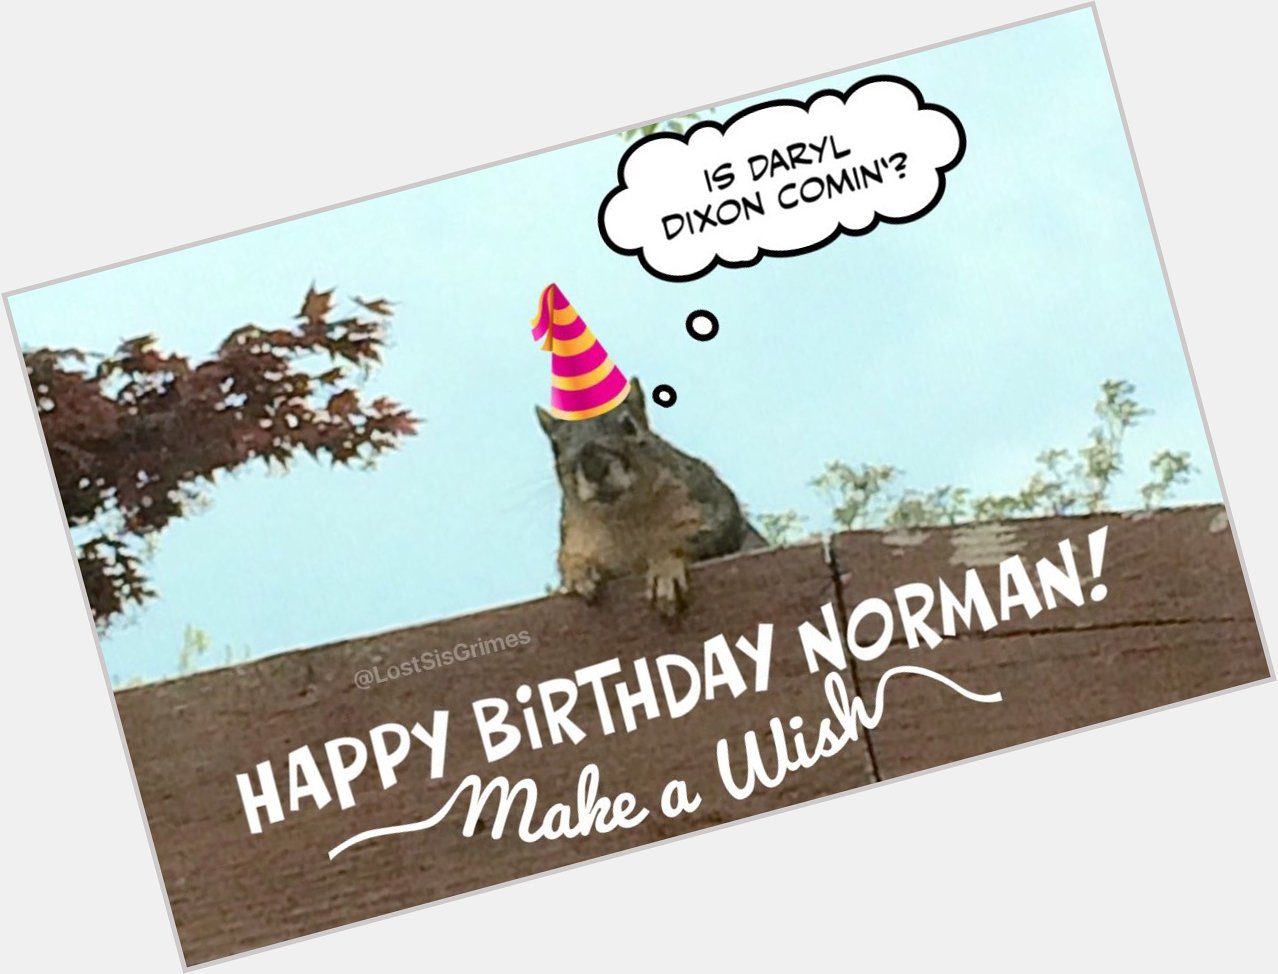 HaPpY BiRtHdAy   Norman Reedus

Make a wish and blow up all the Saviors 